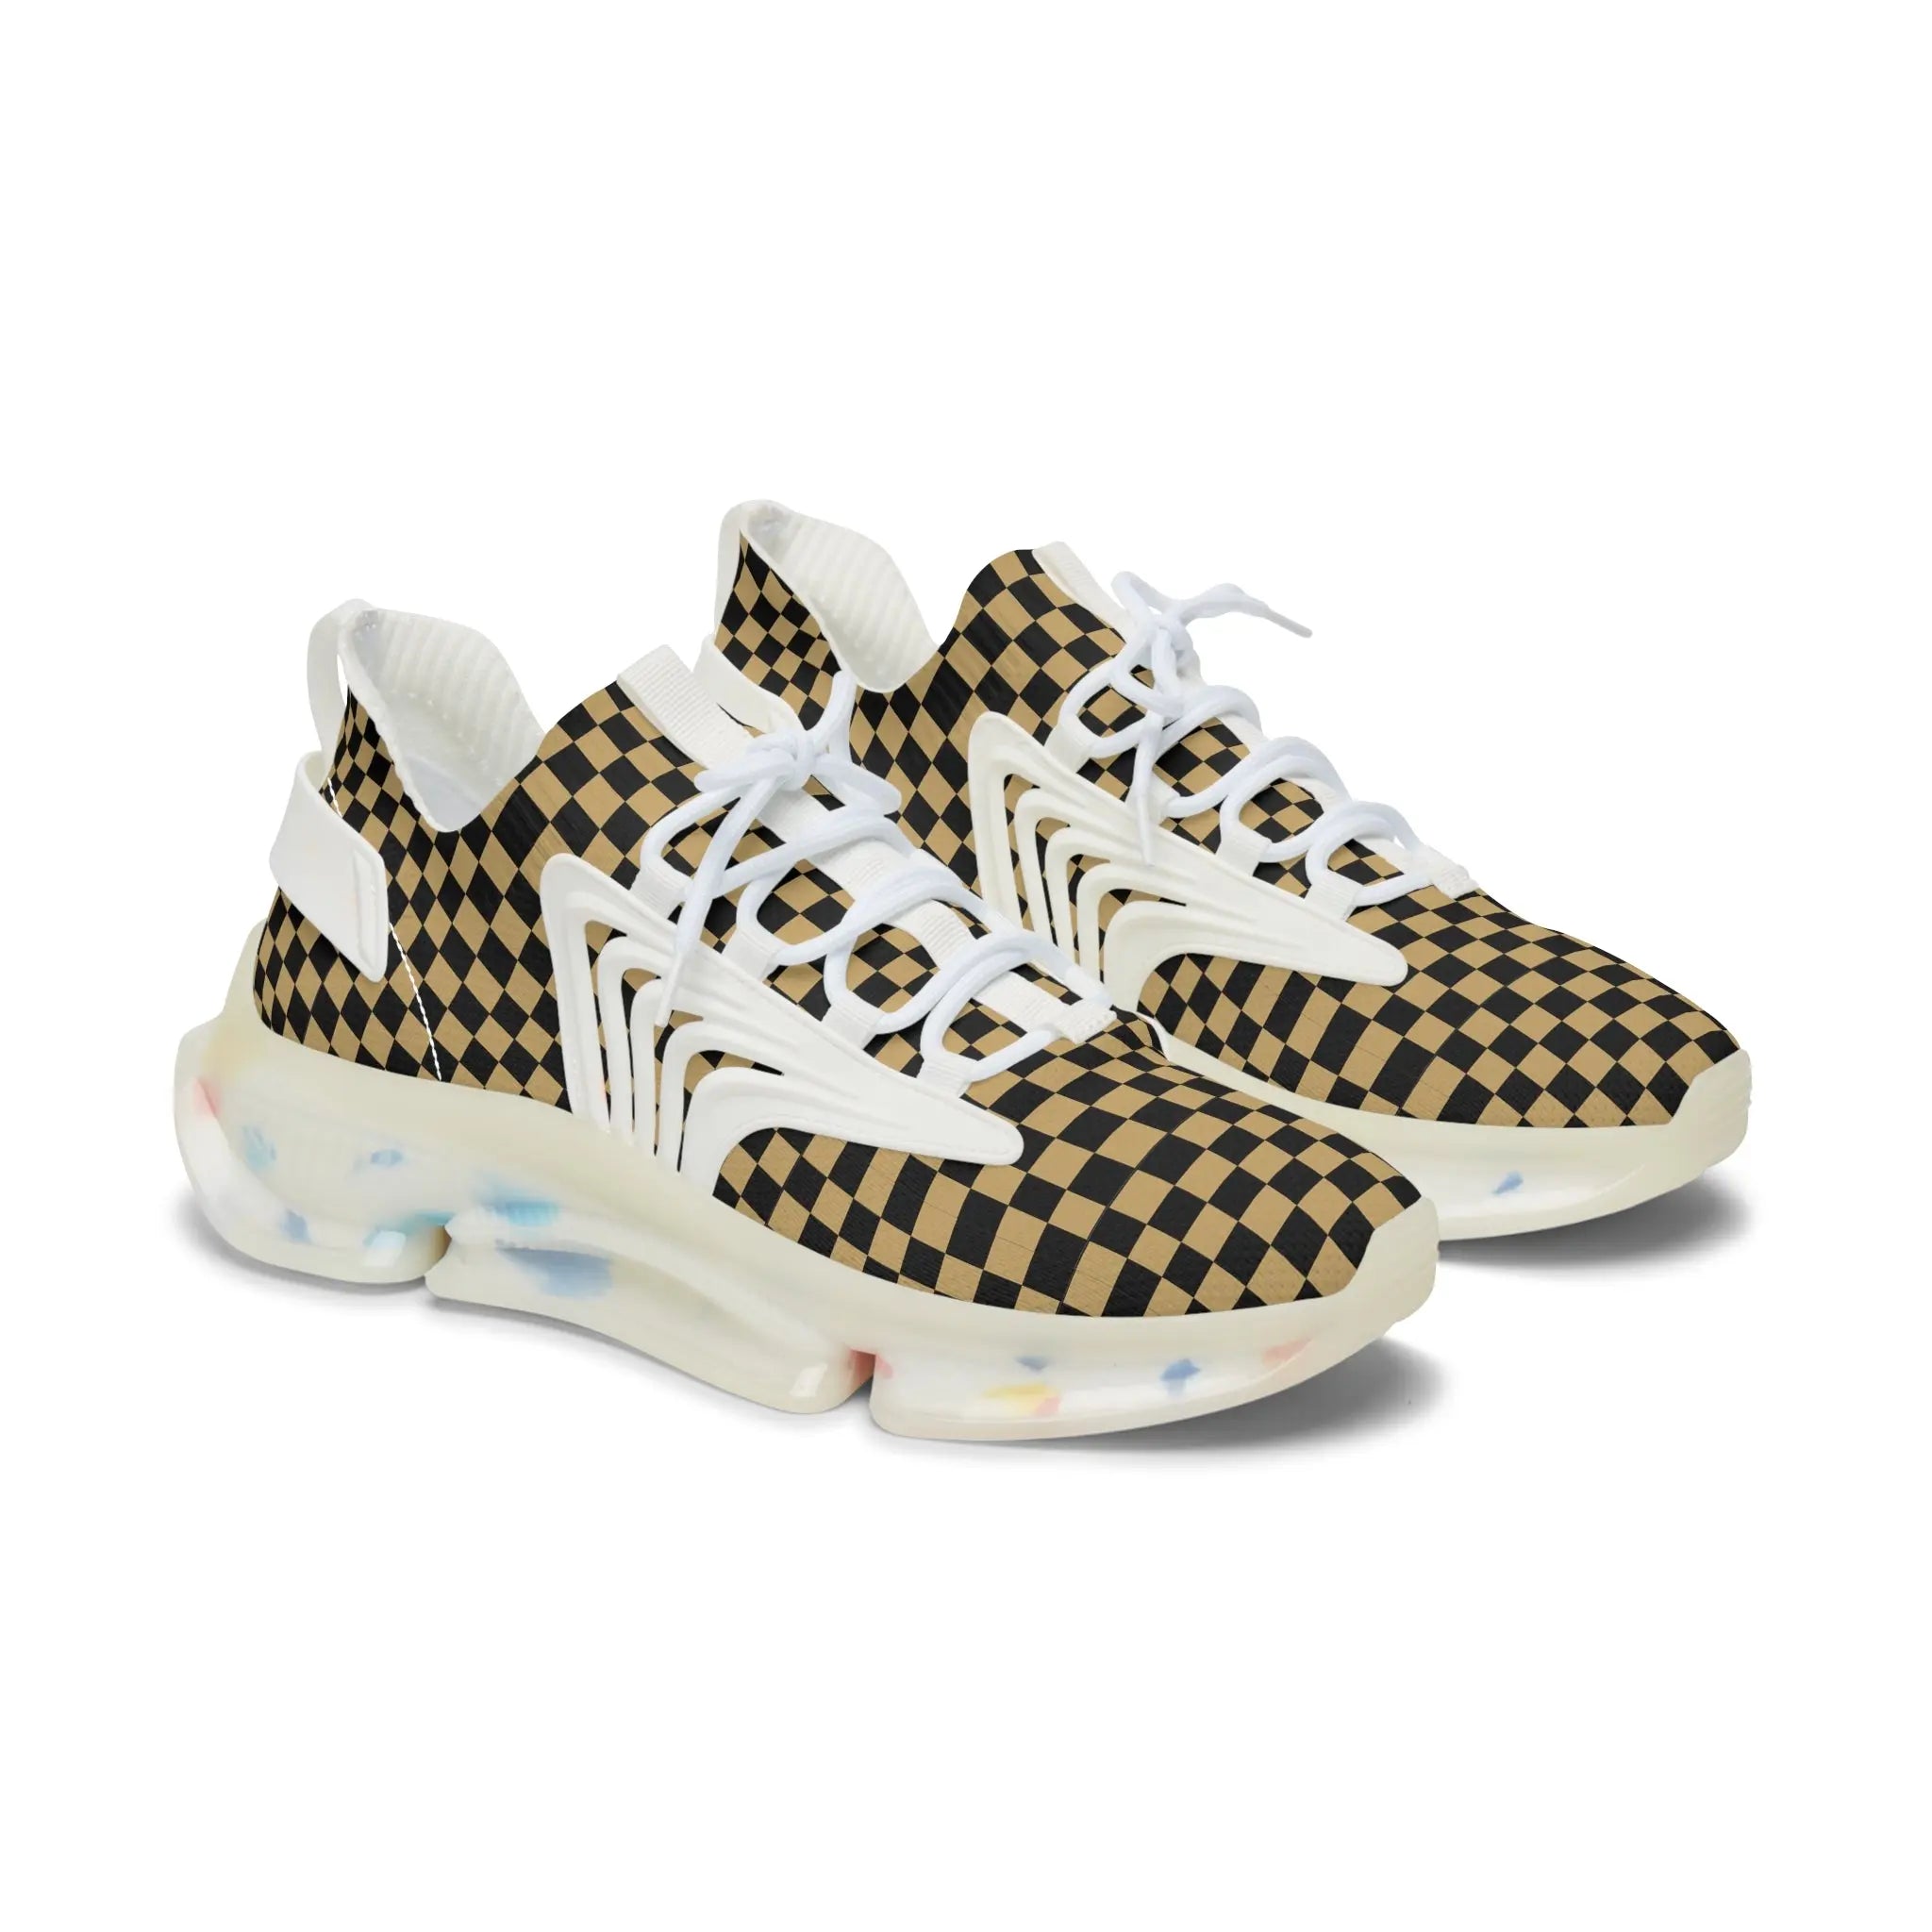 Women's Black and Gold Check Mate Mesh Sneakers, Women's Athletic Shoes, Casual Sneakers Shoes White-sole-US-12 The Middle Aged Groove